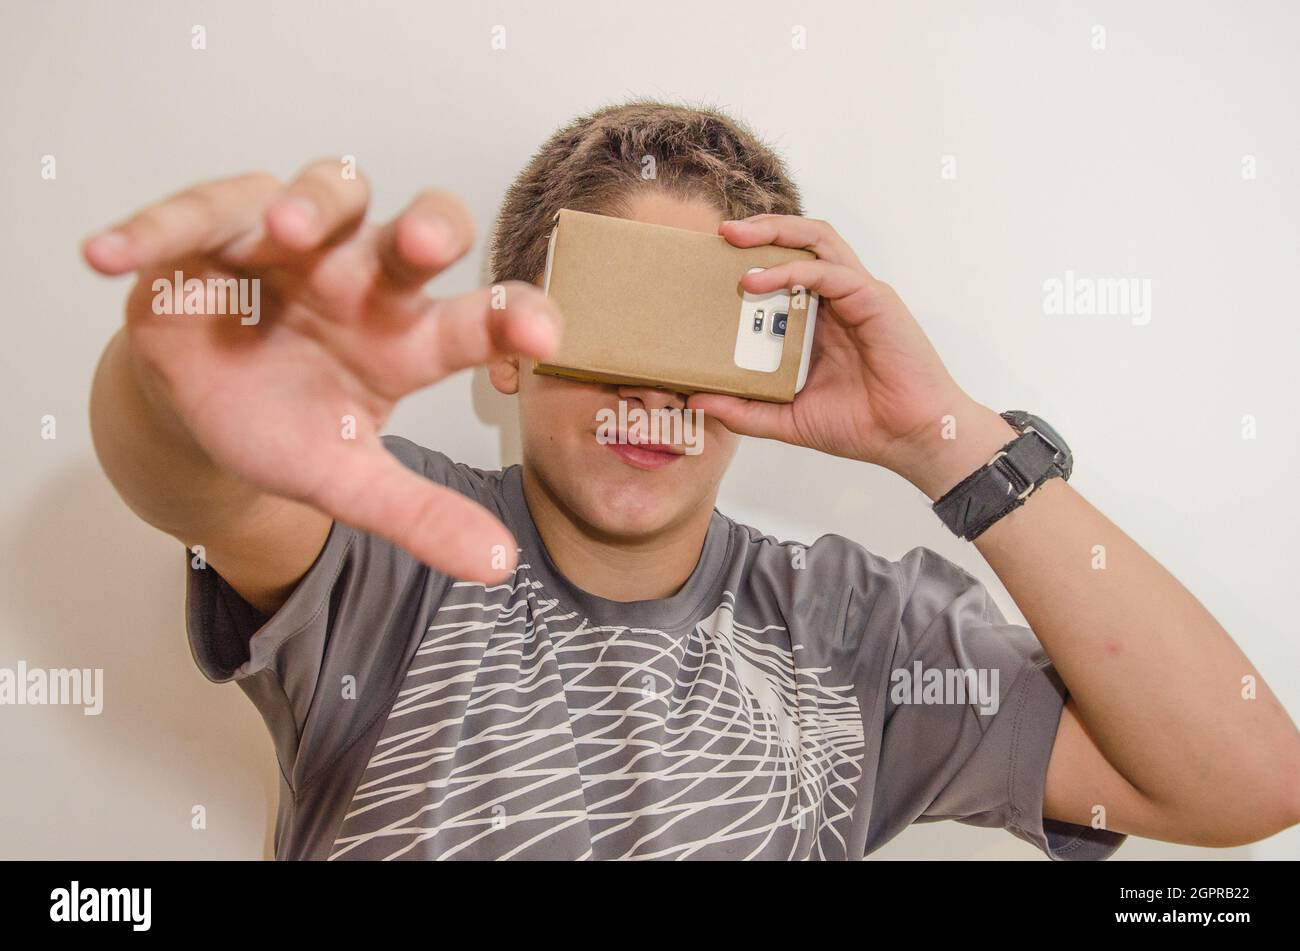 Smiling Teenager Boy Covering Eyes With Smart Phone In Cardboard Box Stock Photo